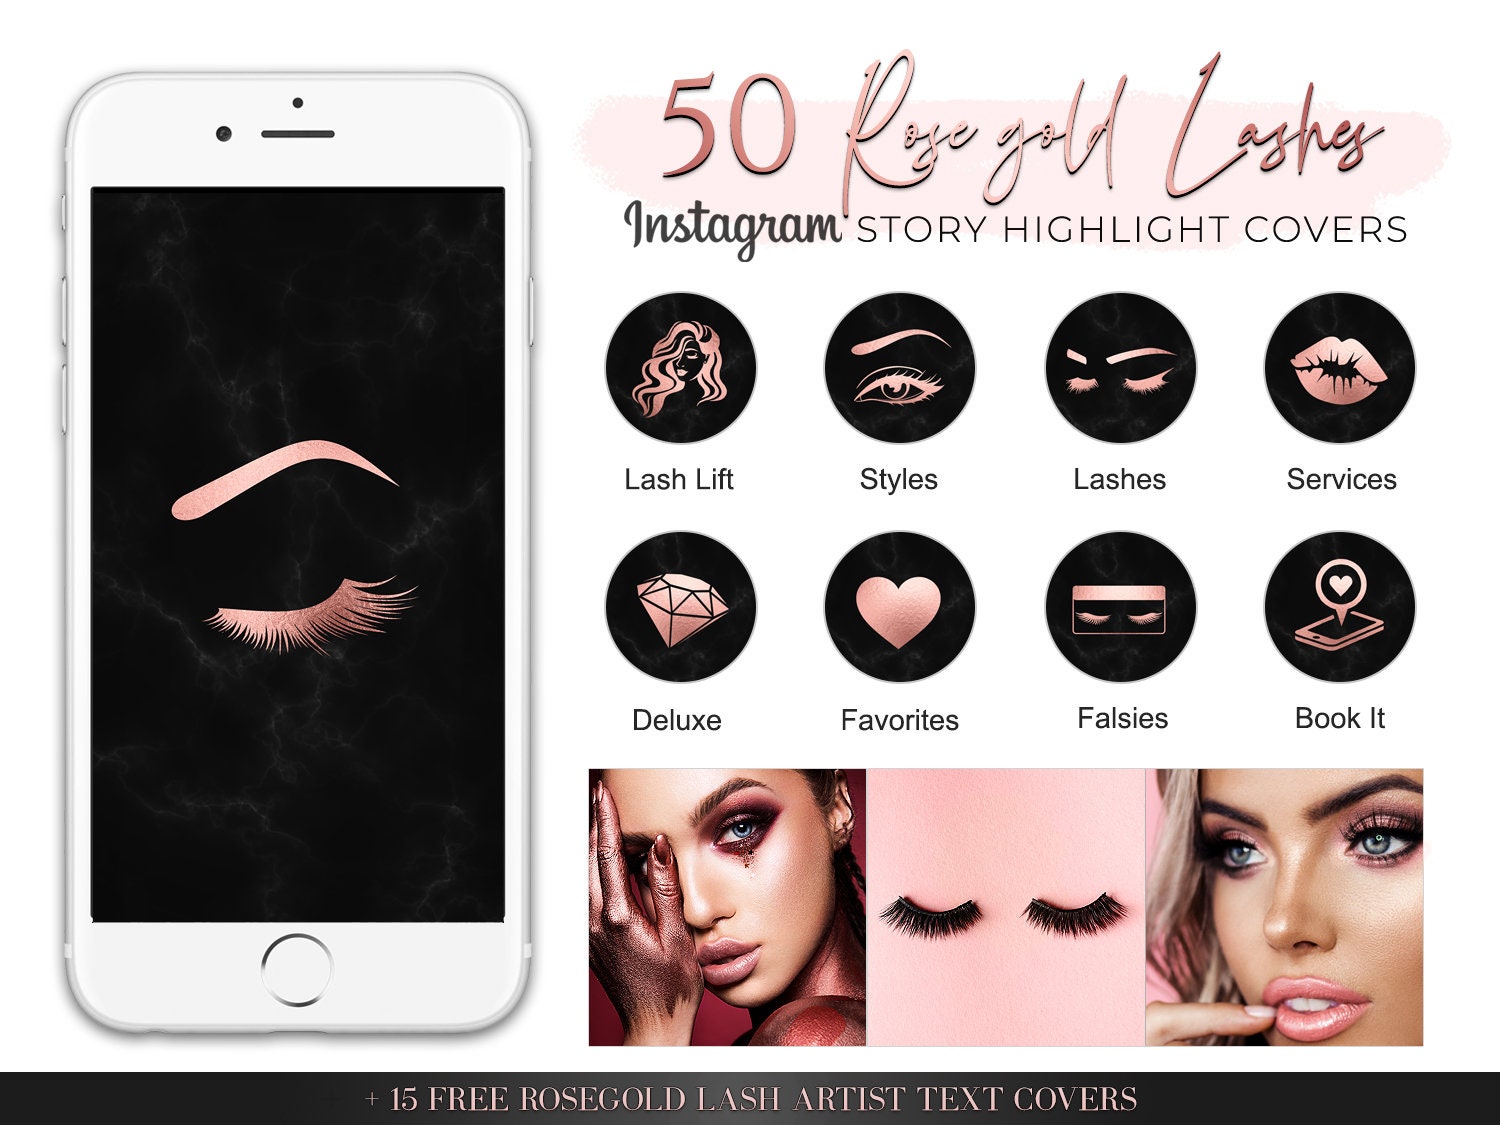 Instagram Story Covers for Lash Technicians Beauty Instagram Highlight Icons Blush Black Beauty Highlights Beauty Artist Instagram Covers